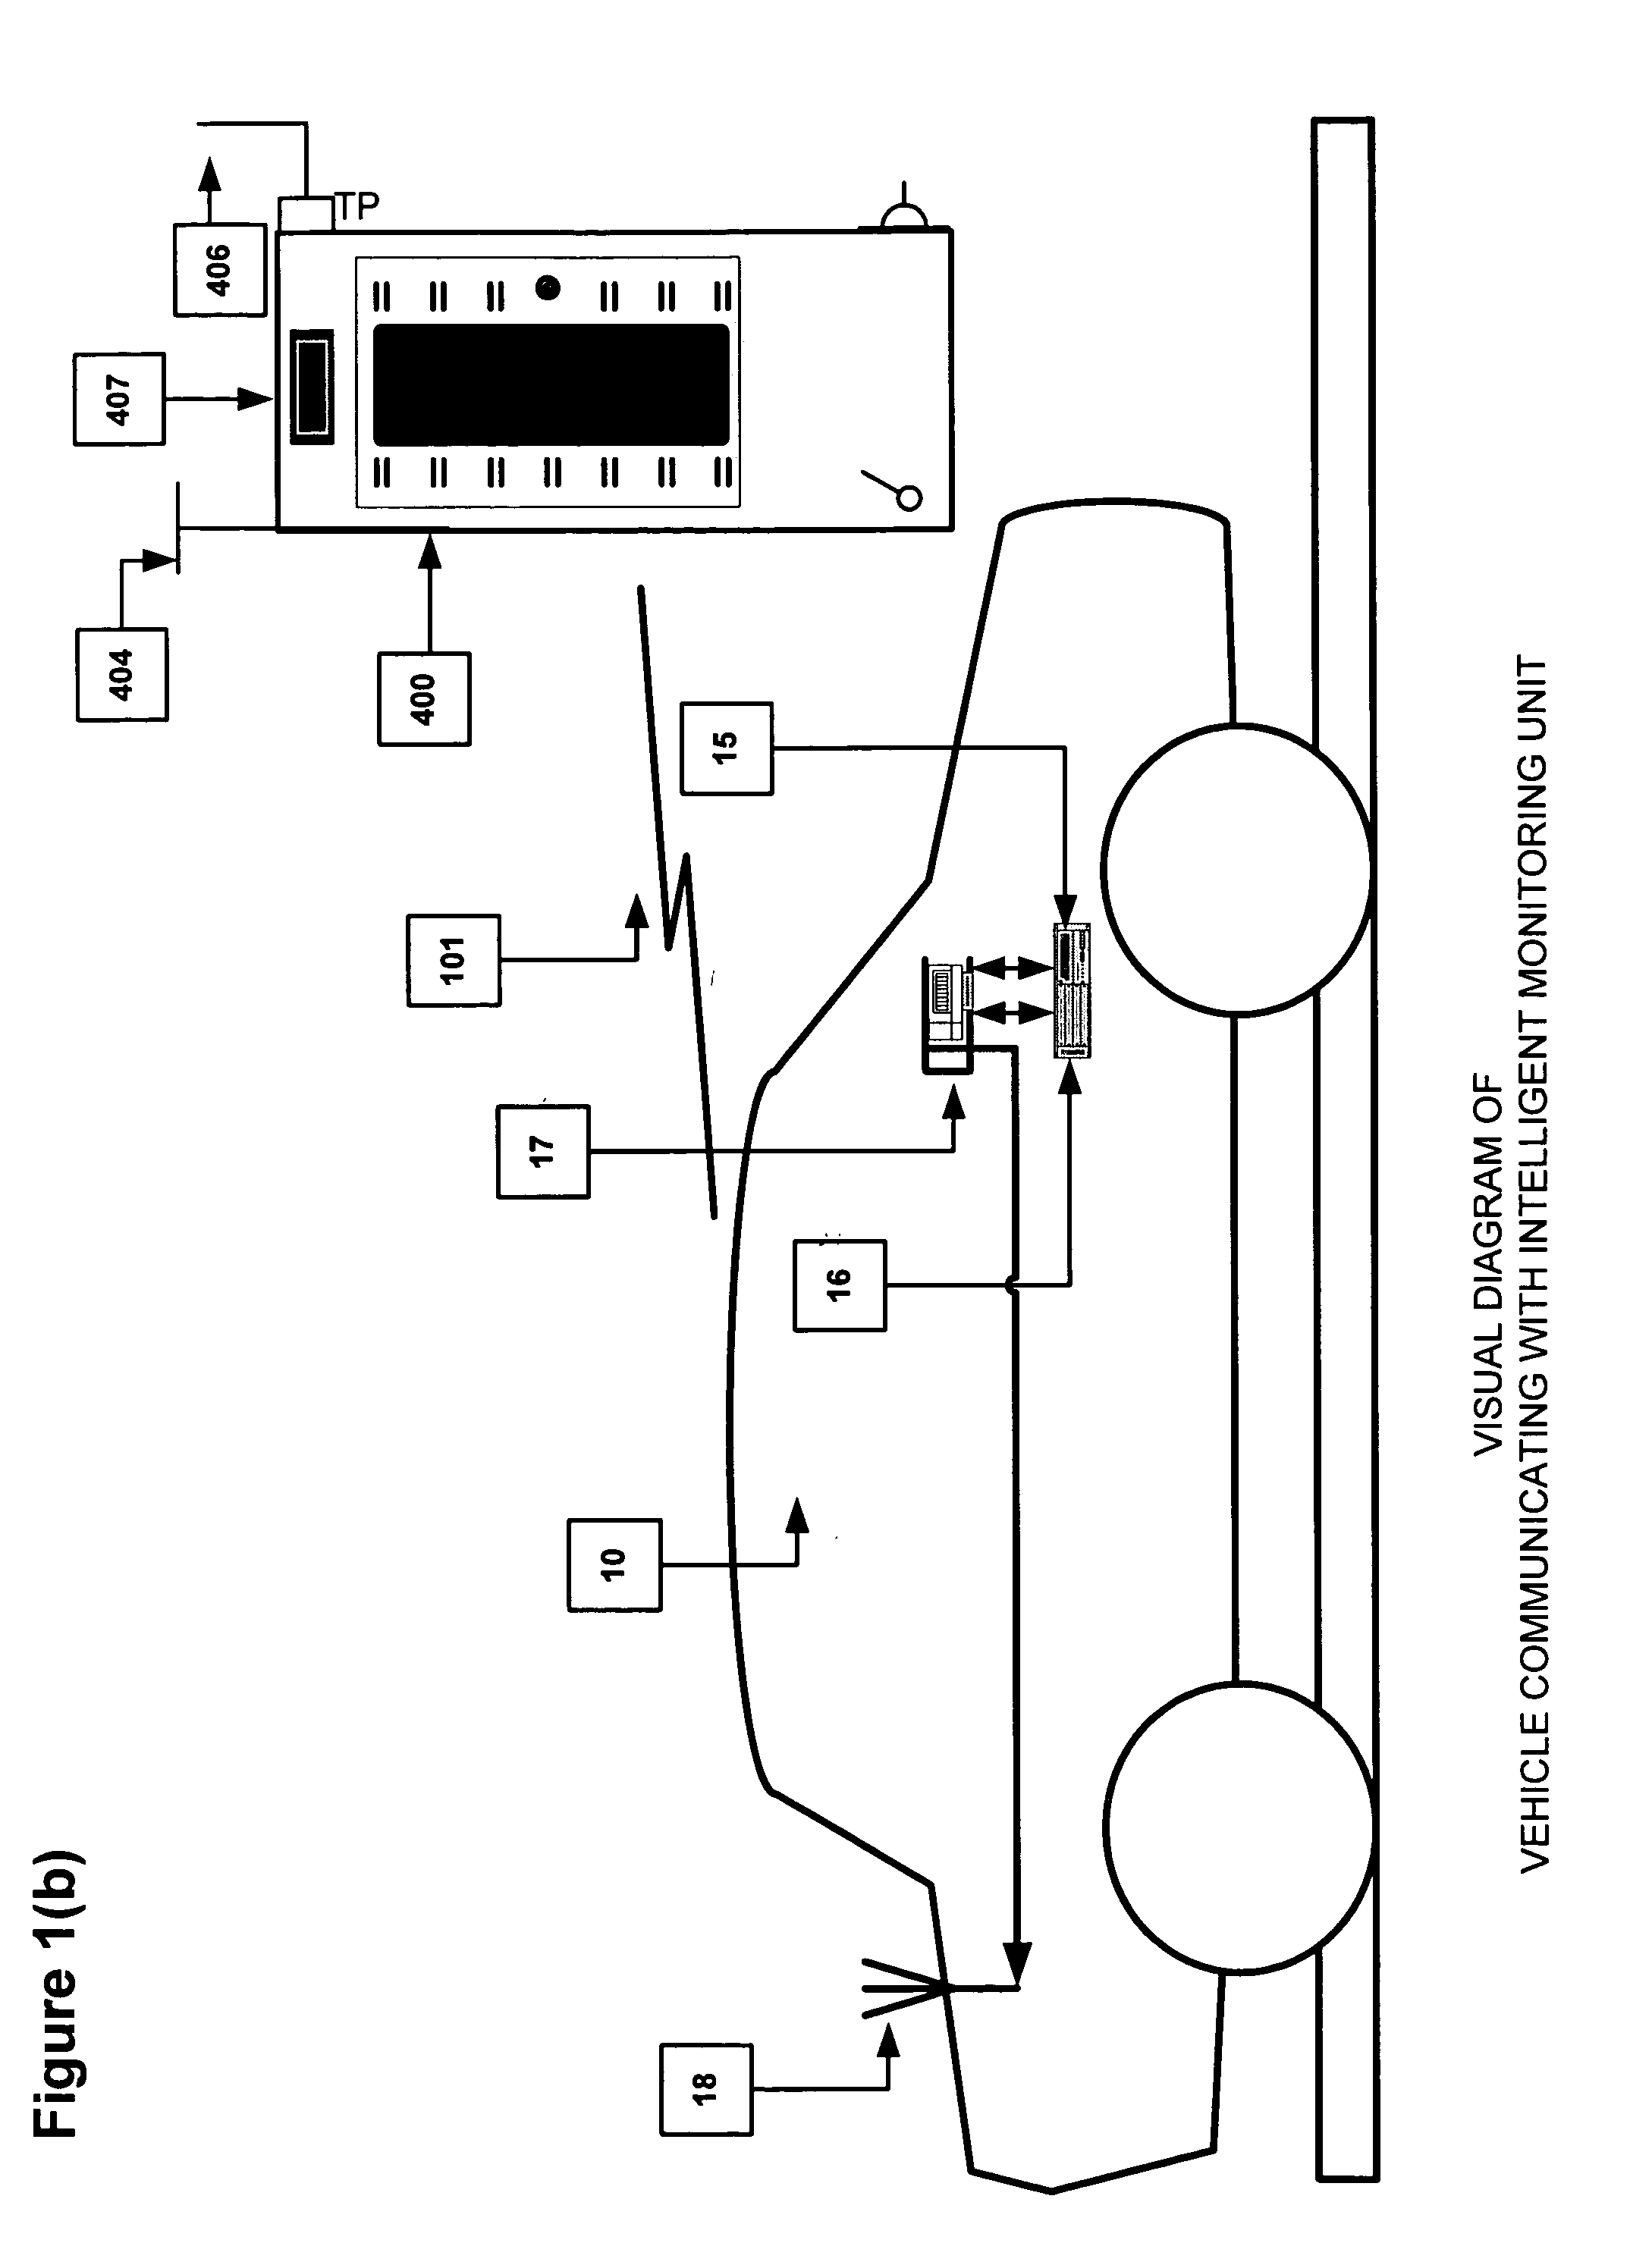 Automobile communication and registry system